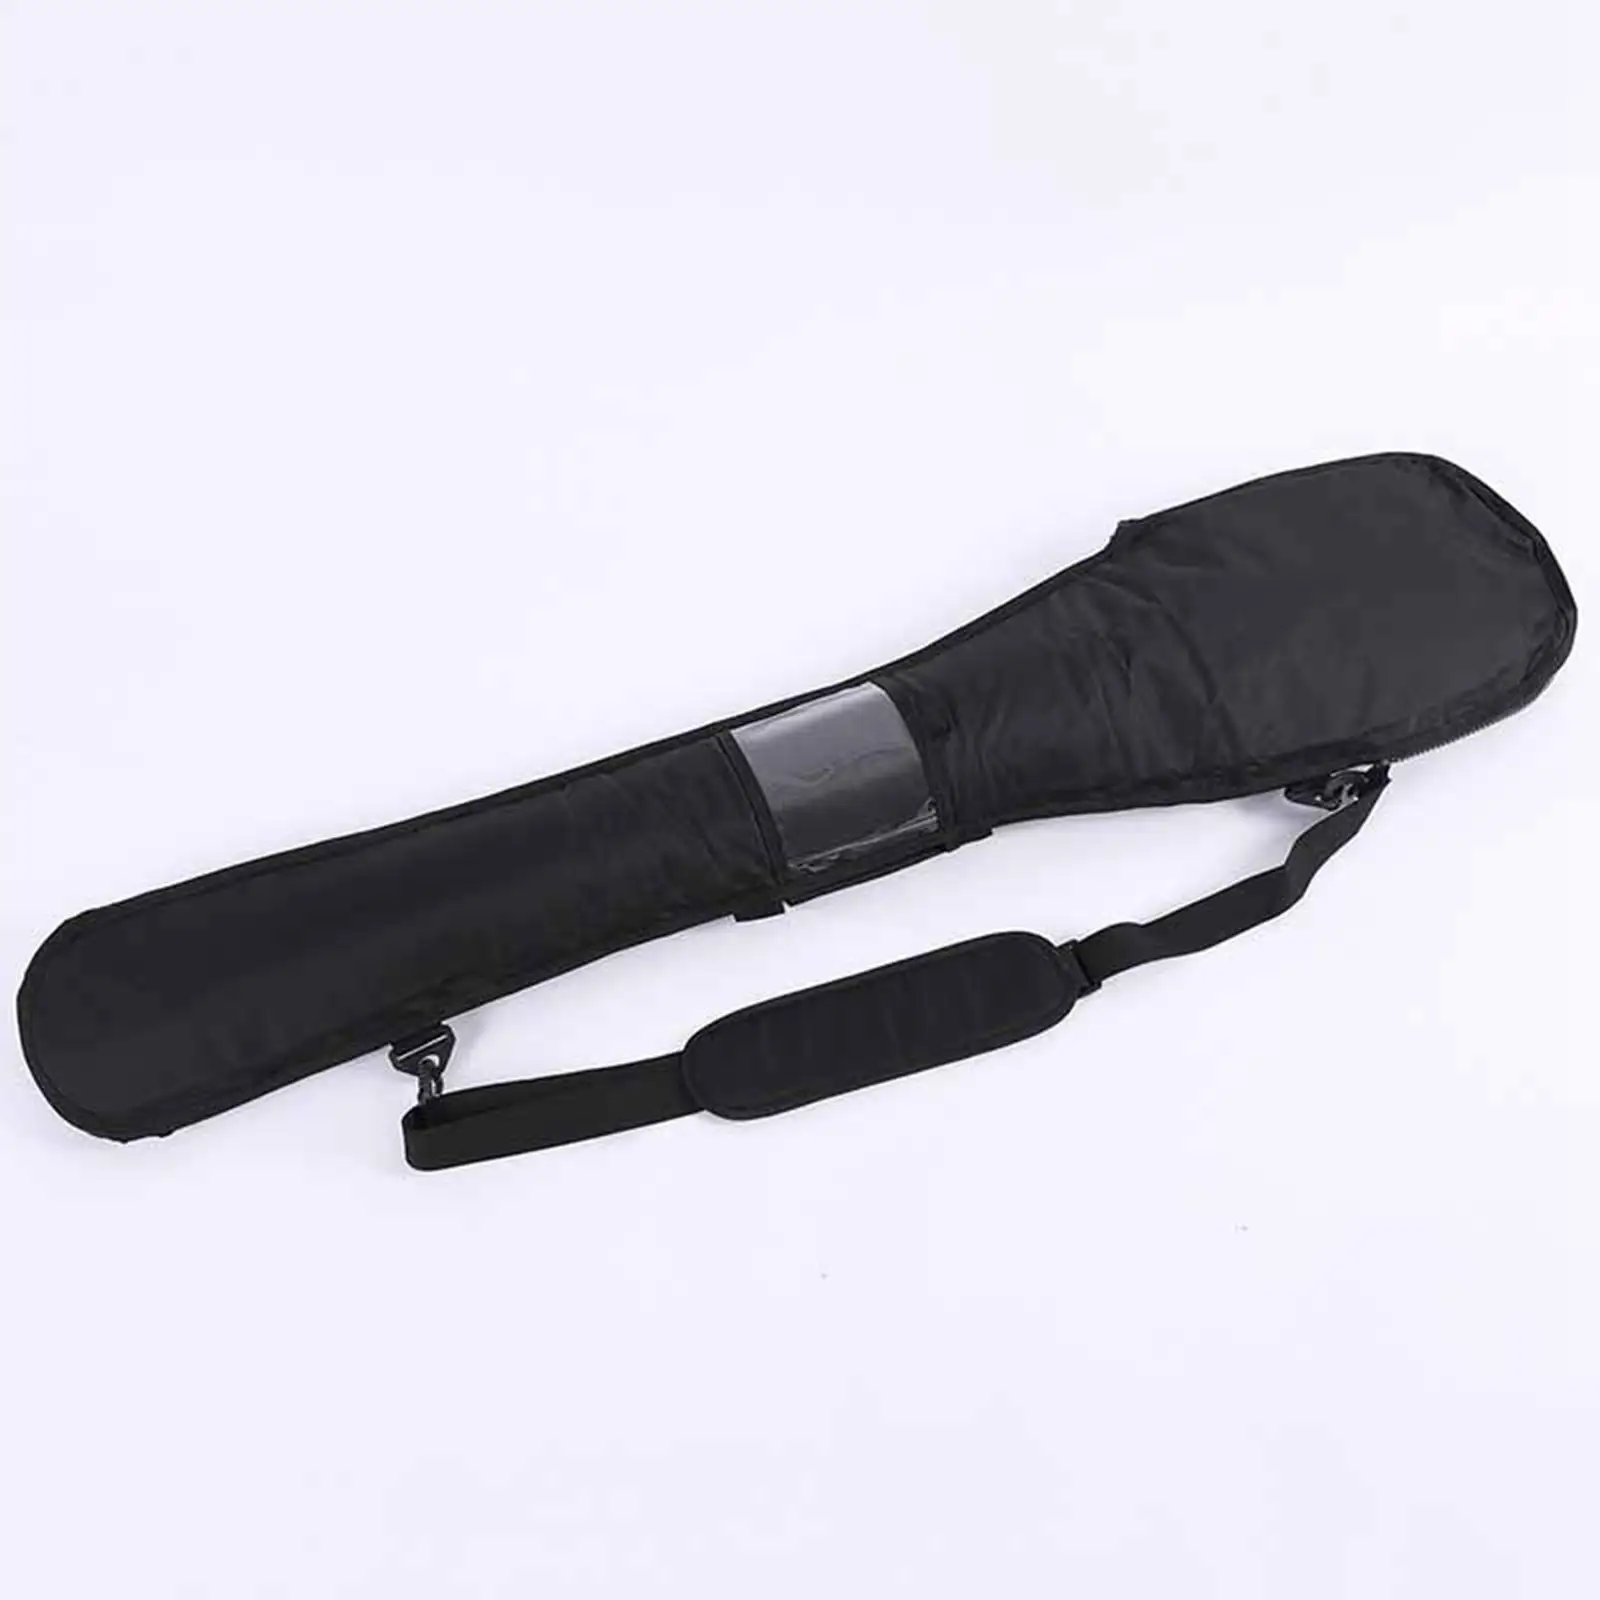 Portable Boat Paddle Pouch Protective Accessory with Adjustable Strap Pocket for Outdoor Canoe Rafting Surfboard